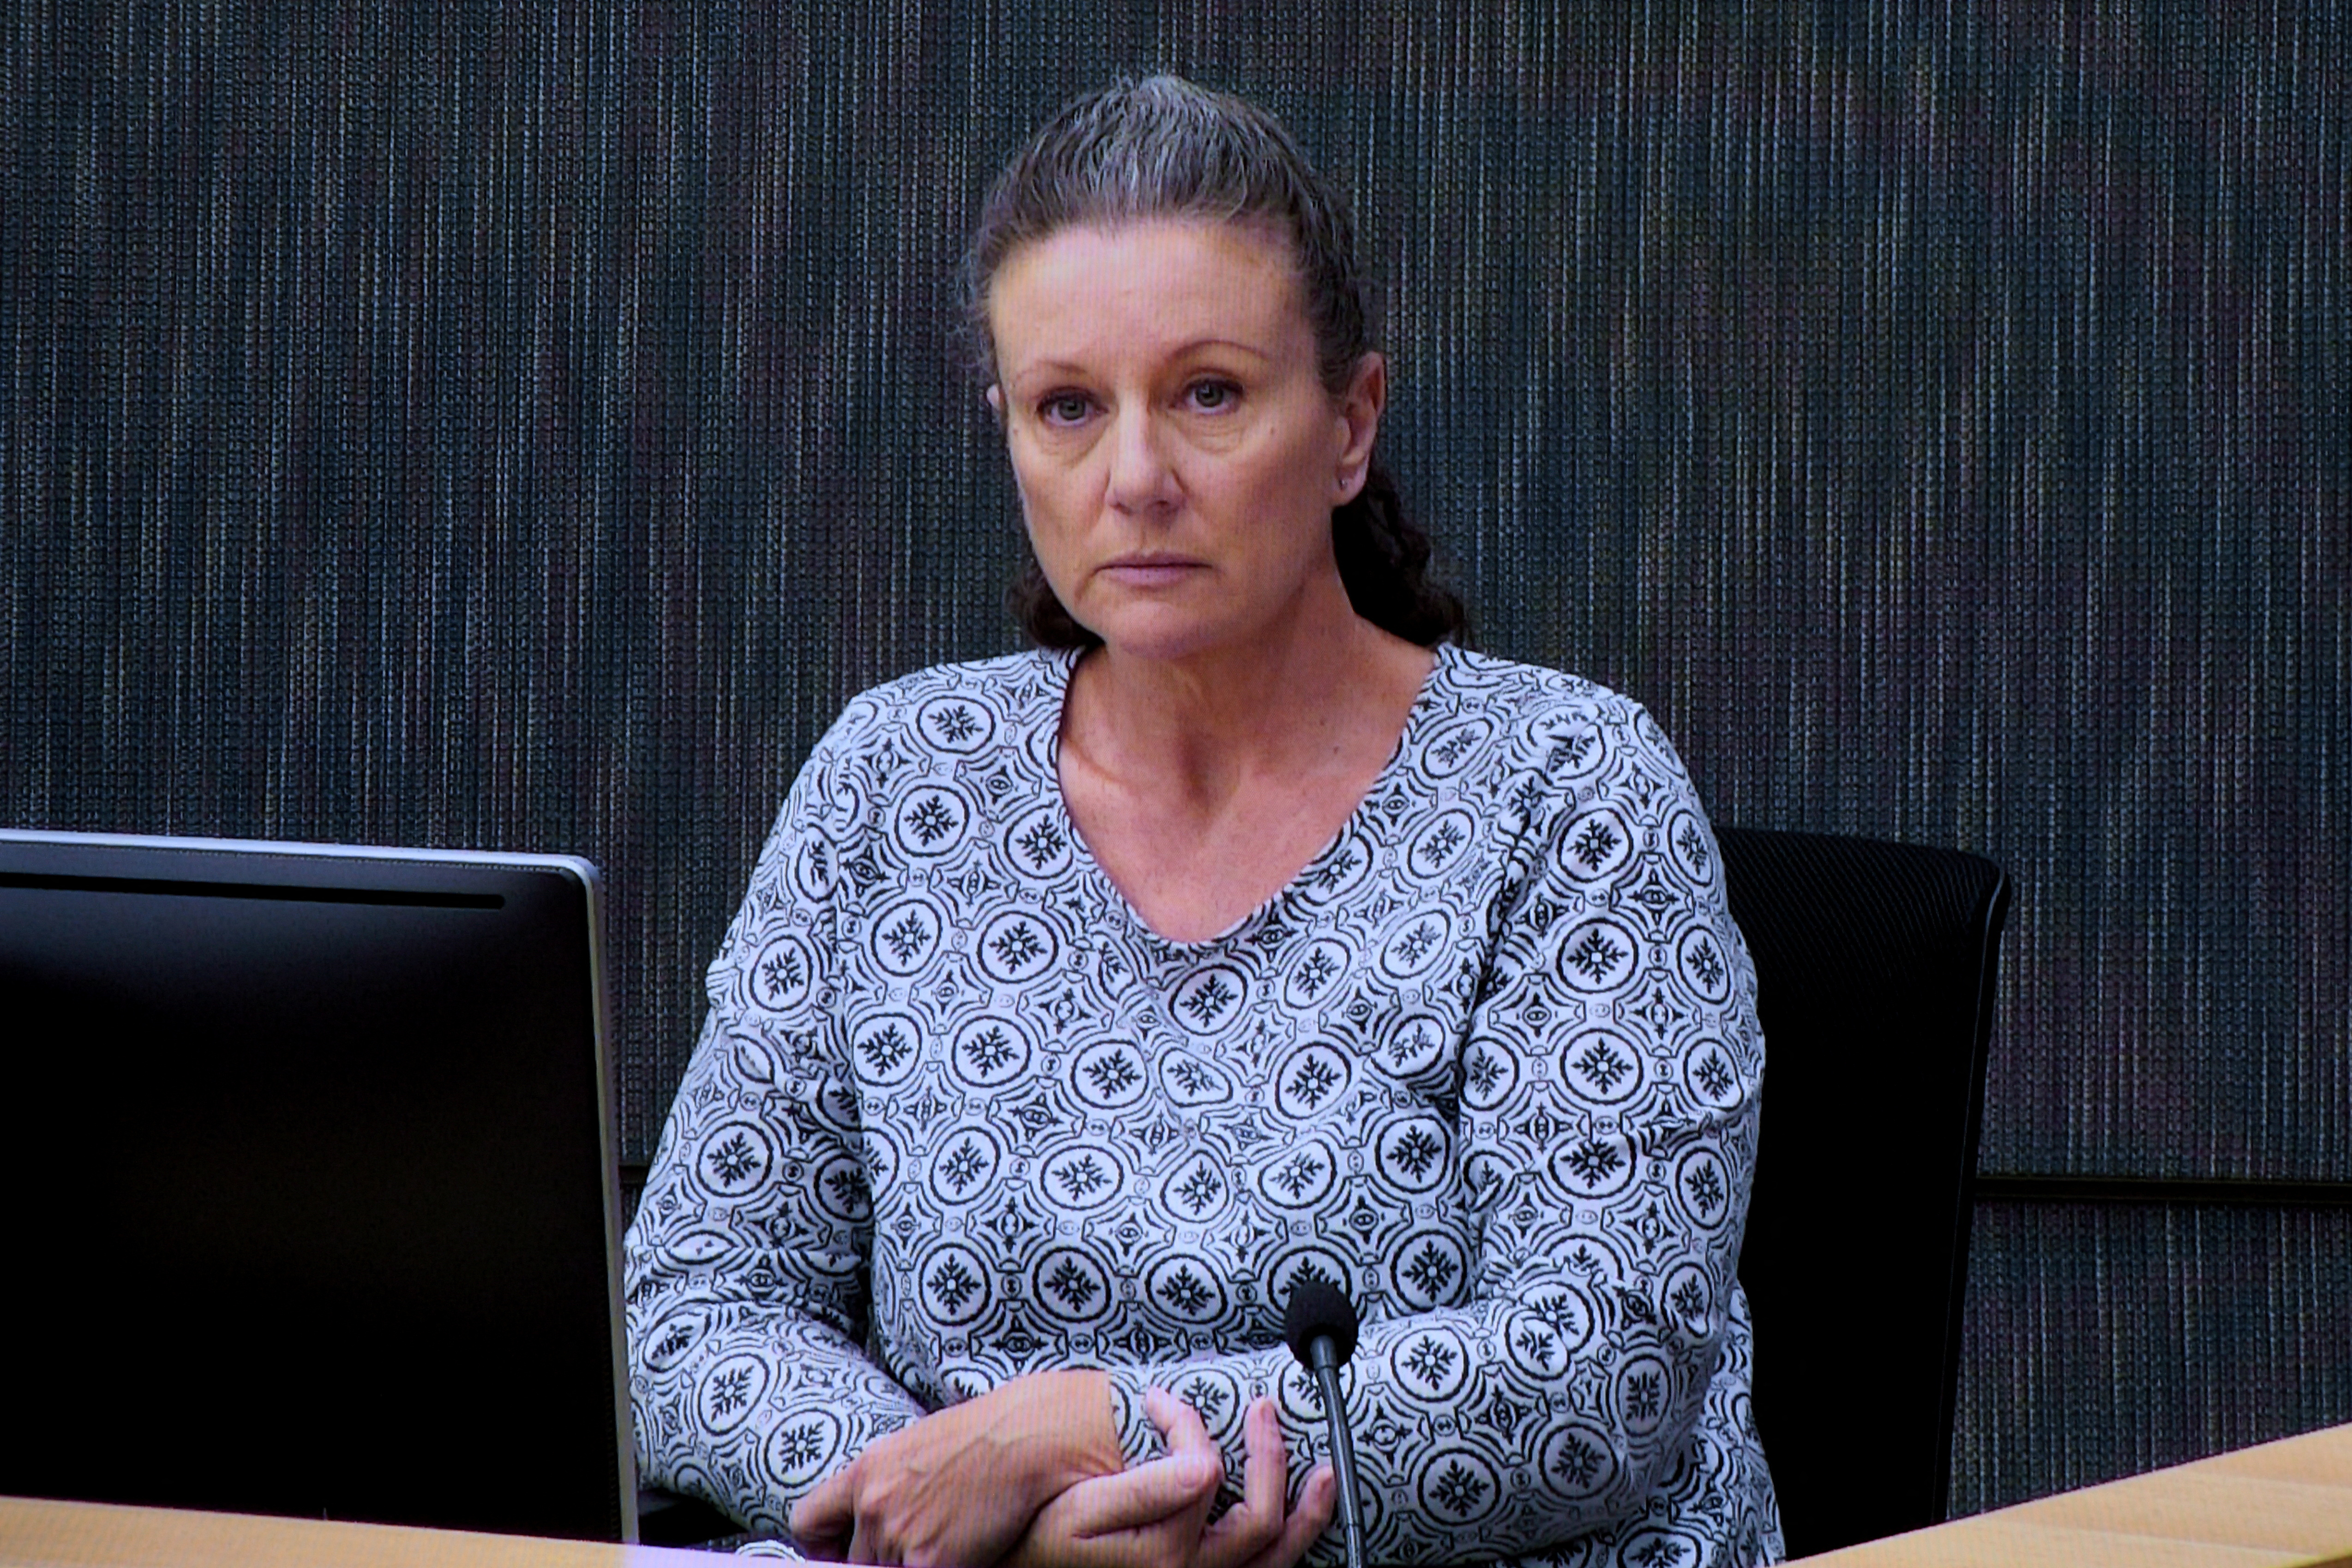 Kathleen Folbigg appears via video link during a convictions inquiry at the NSW Coroners Court